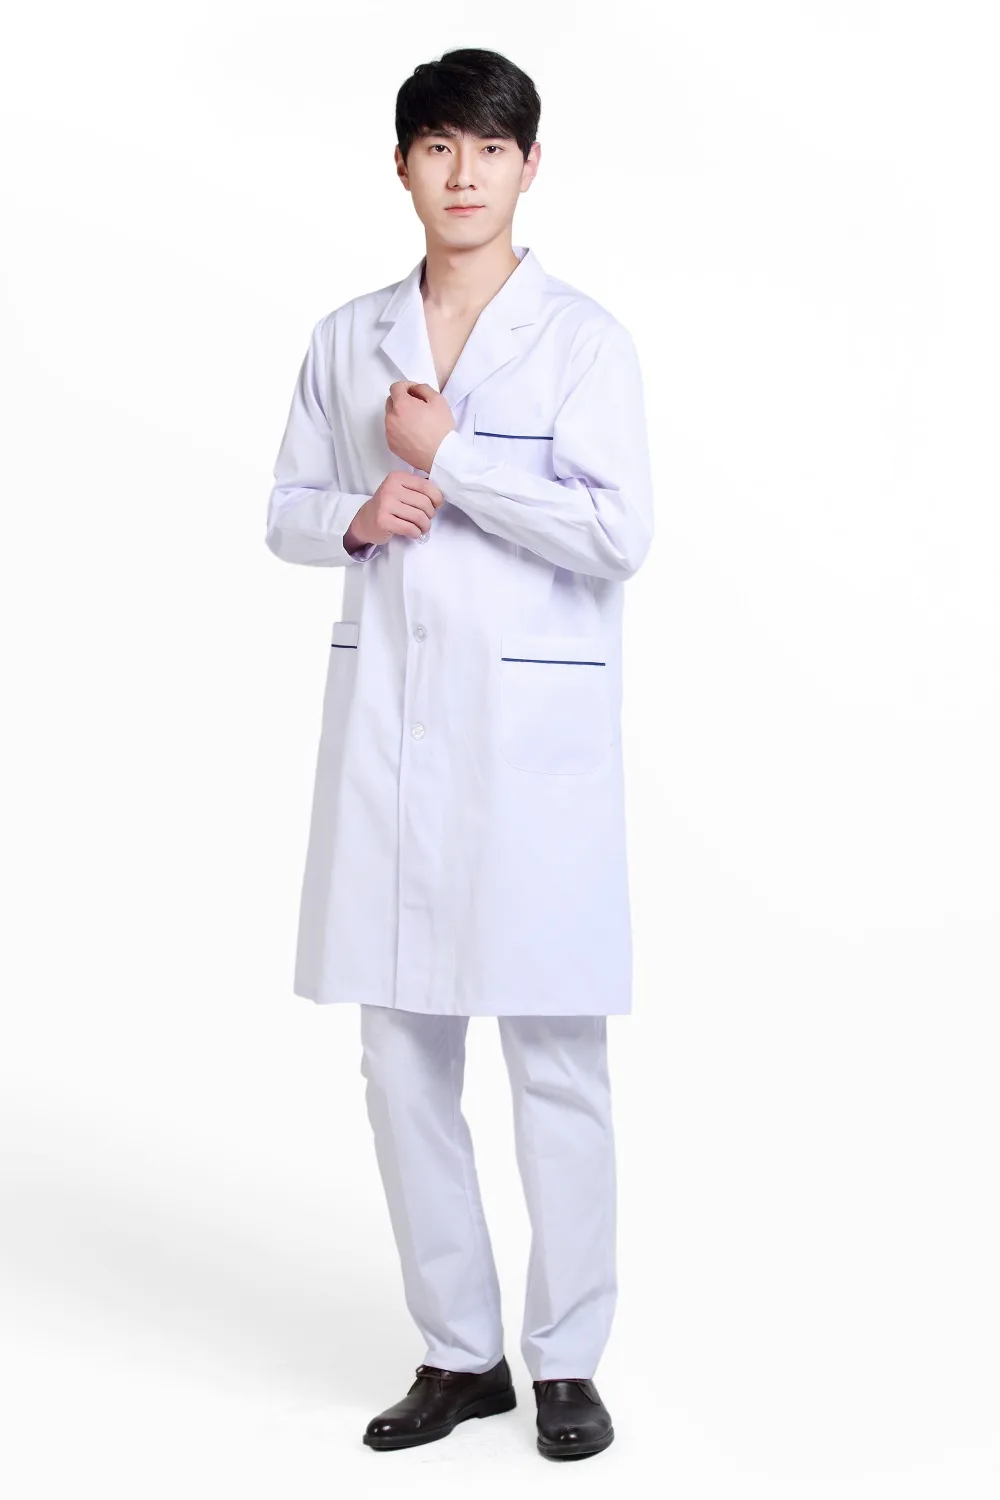 Compare Prices on White Lab Coat- Online Shopping/Buy Low Price ...